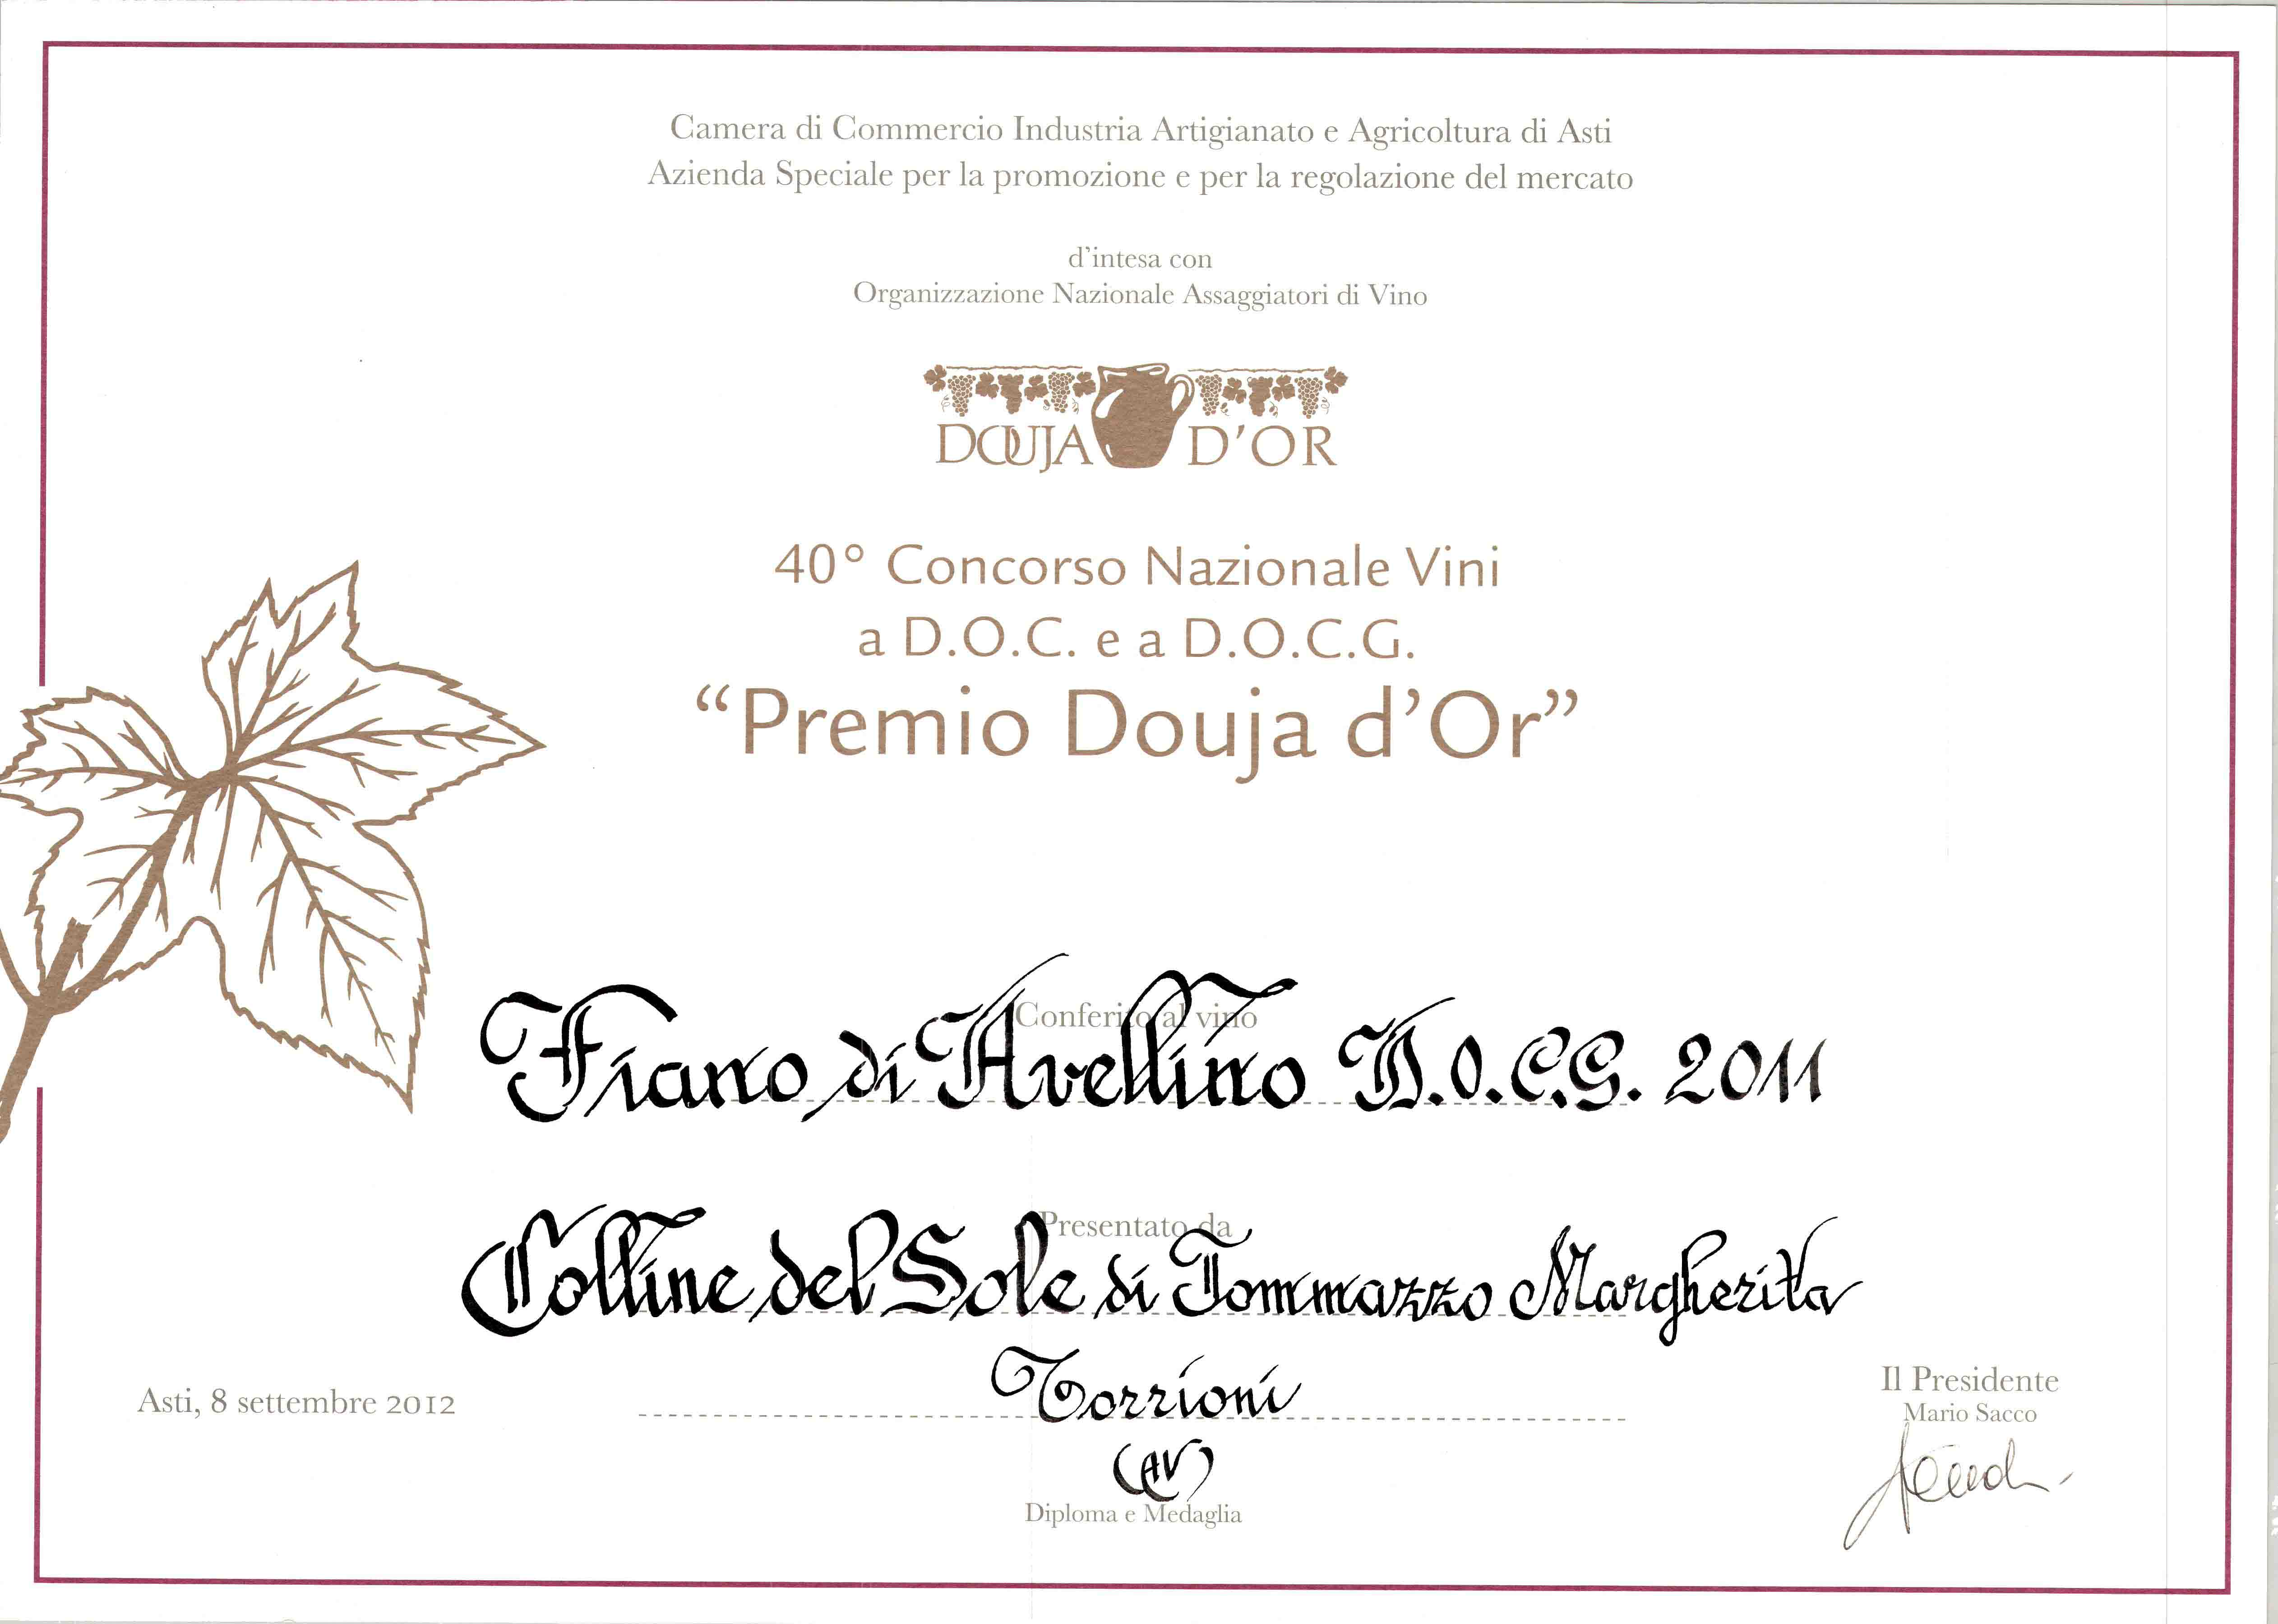 DOUJA D'OR 2011